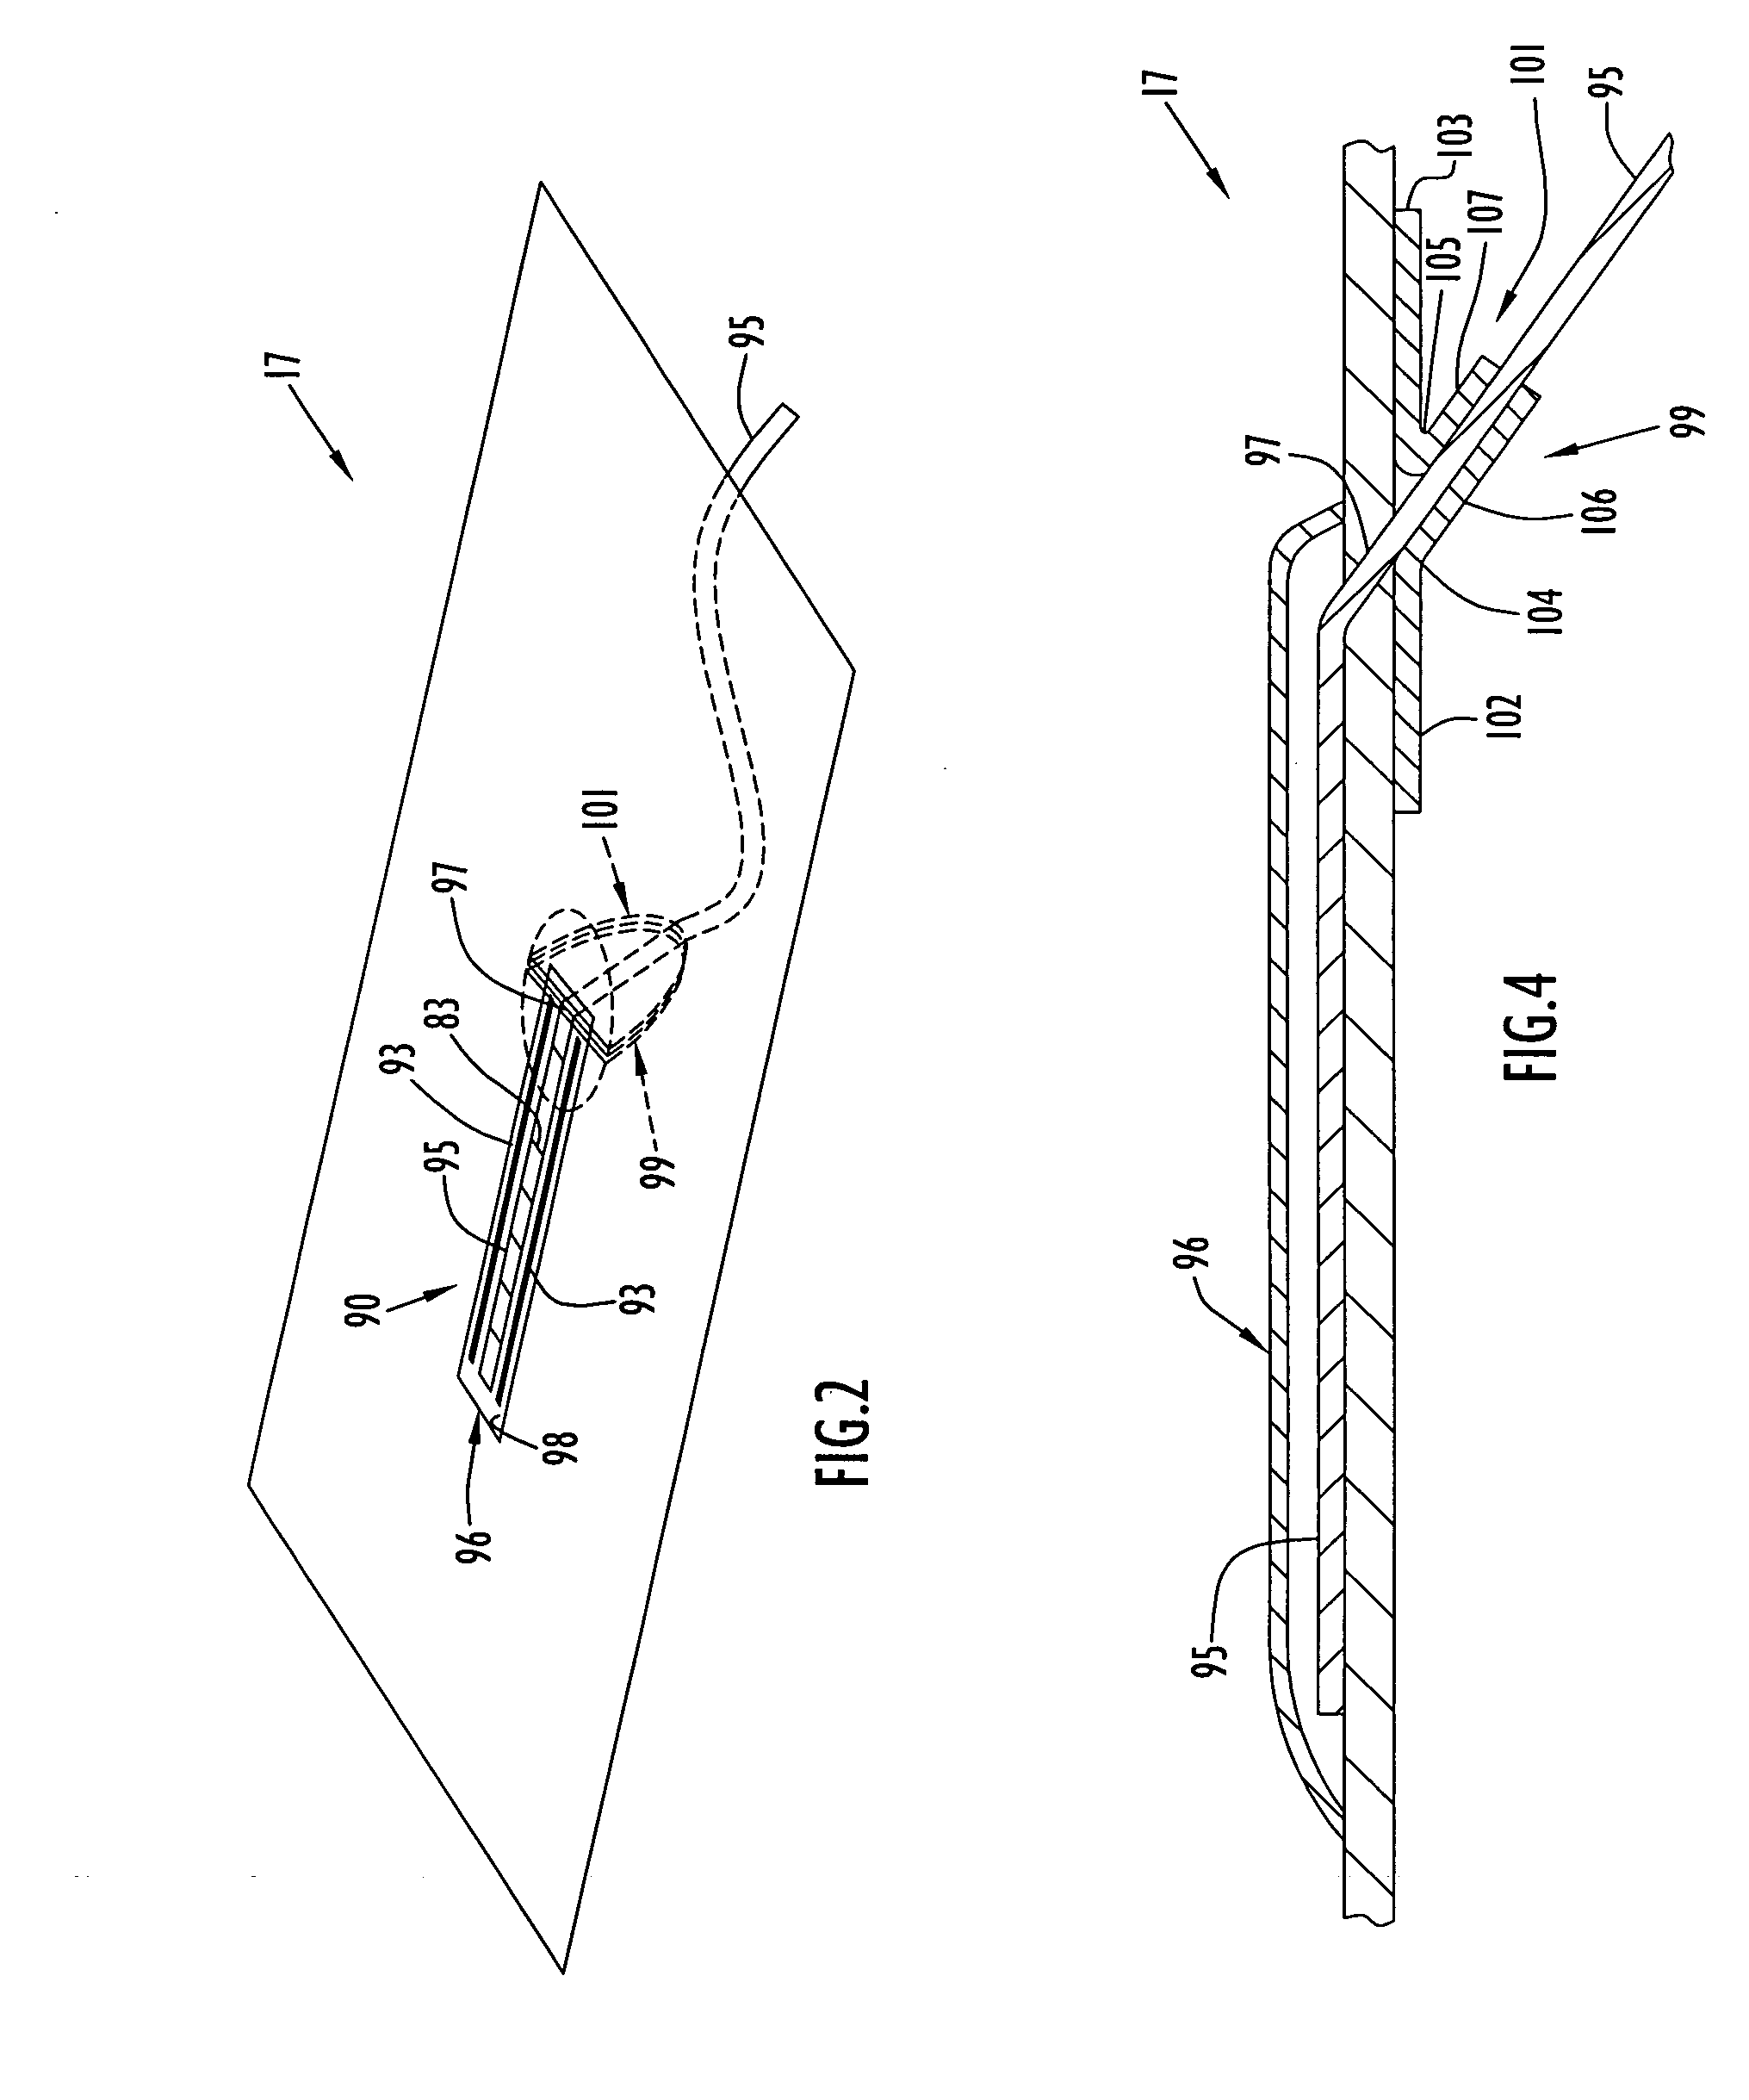 System and method of detecting fluid and leaks in thermal treatment system basins